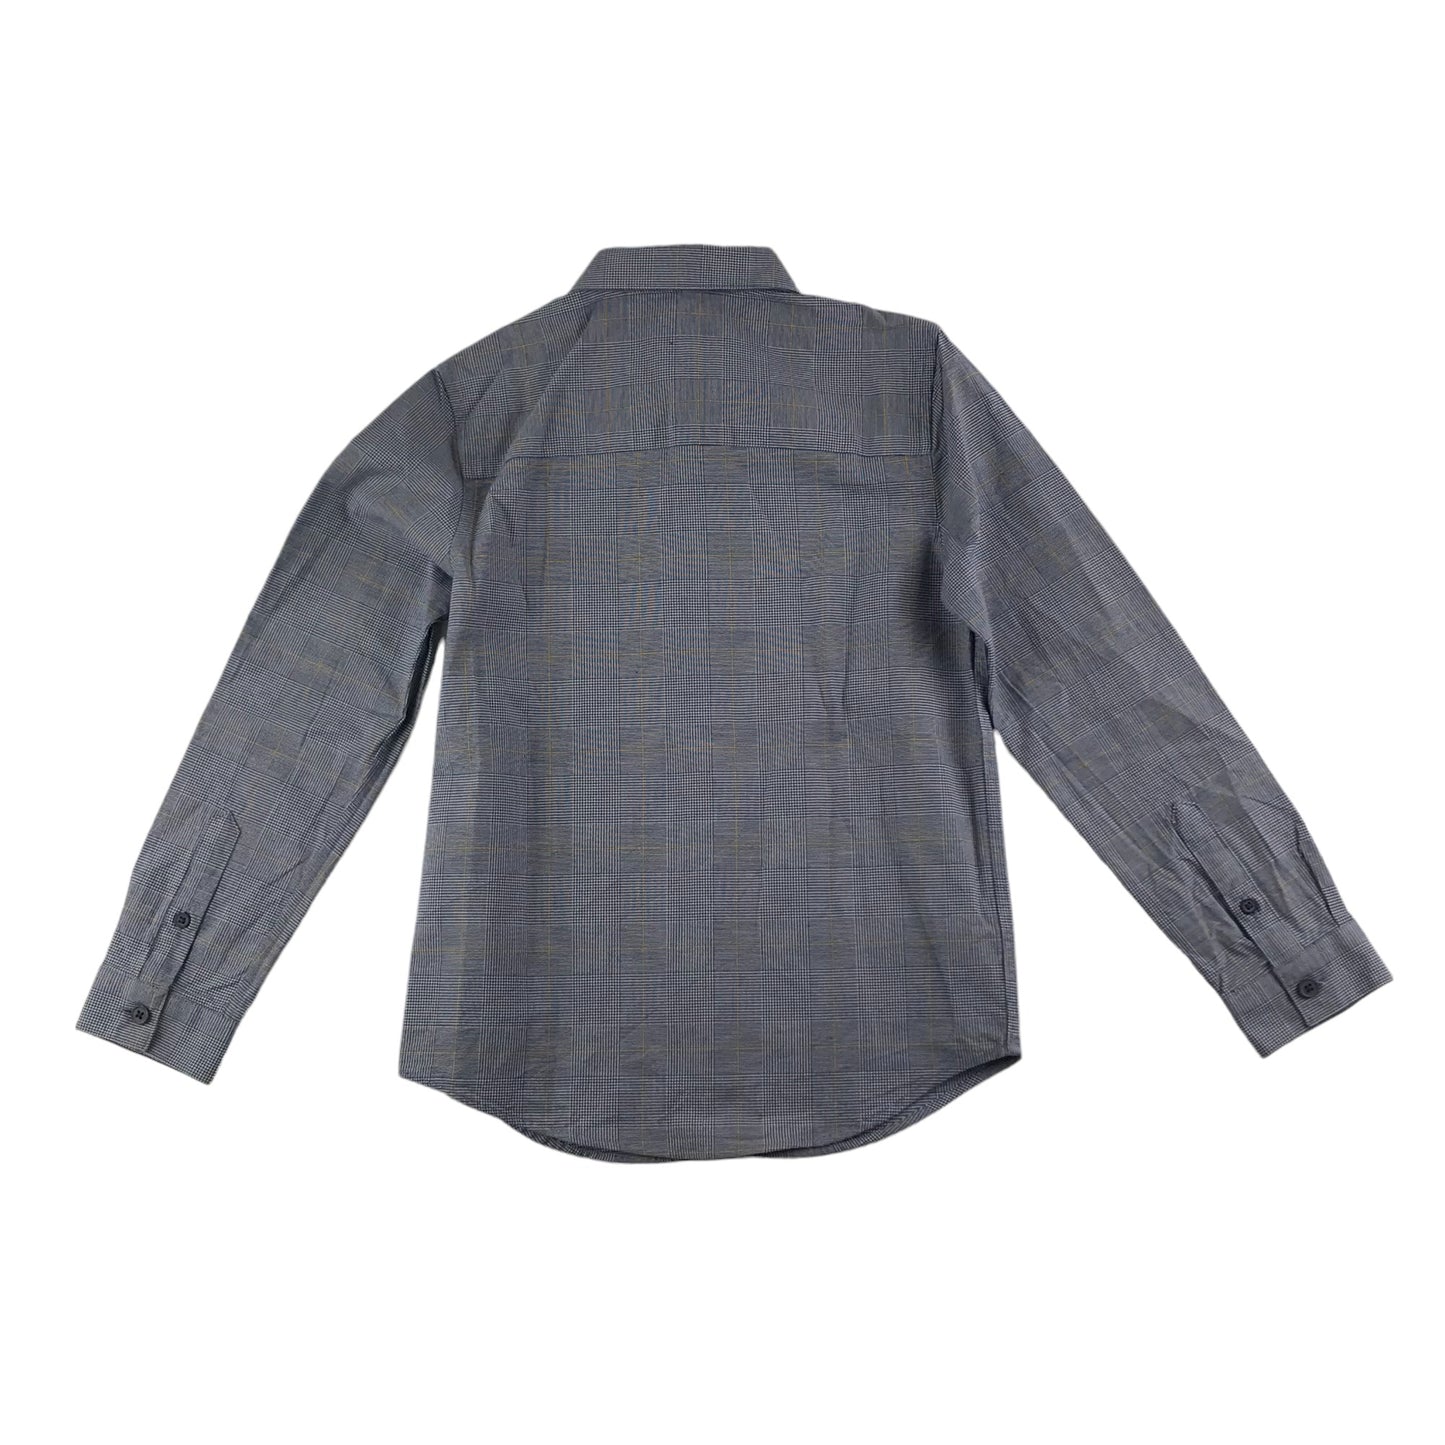 F&F Shirt Age 8 Blue Checked Long Sleeve Button Up Cotton